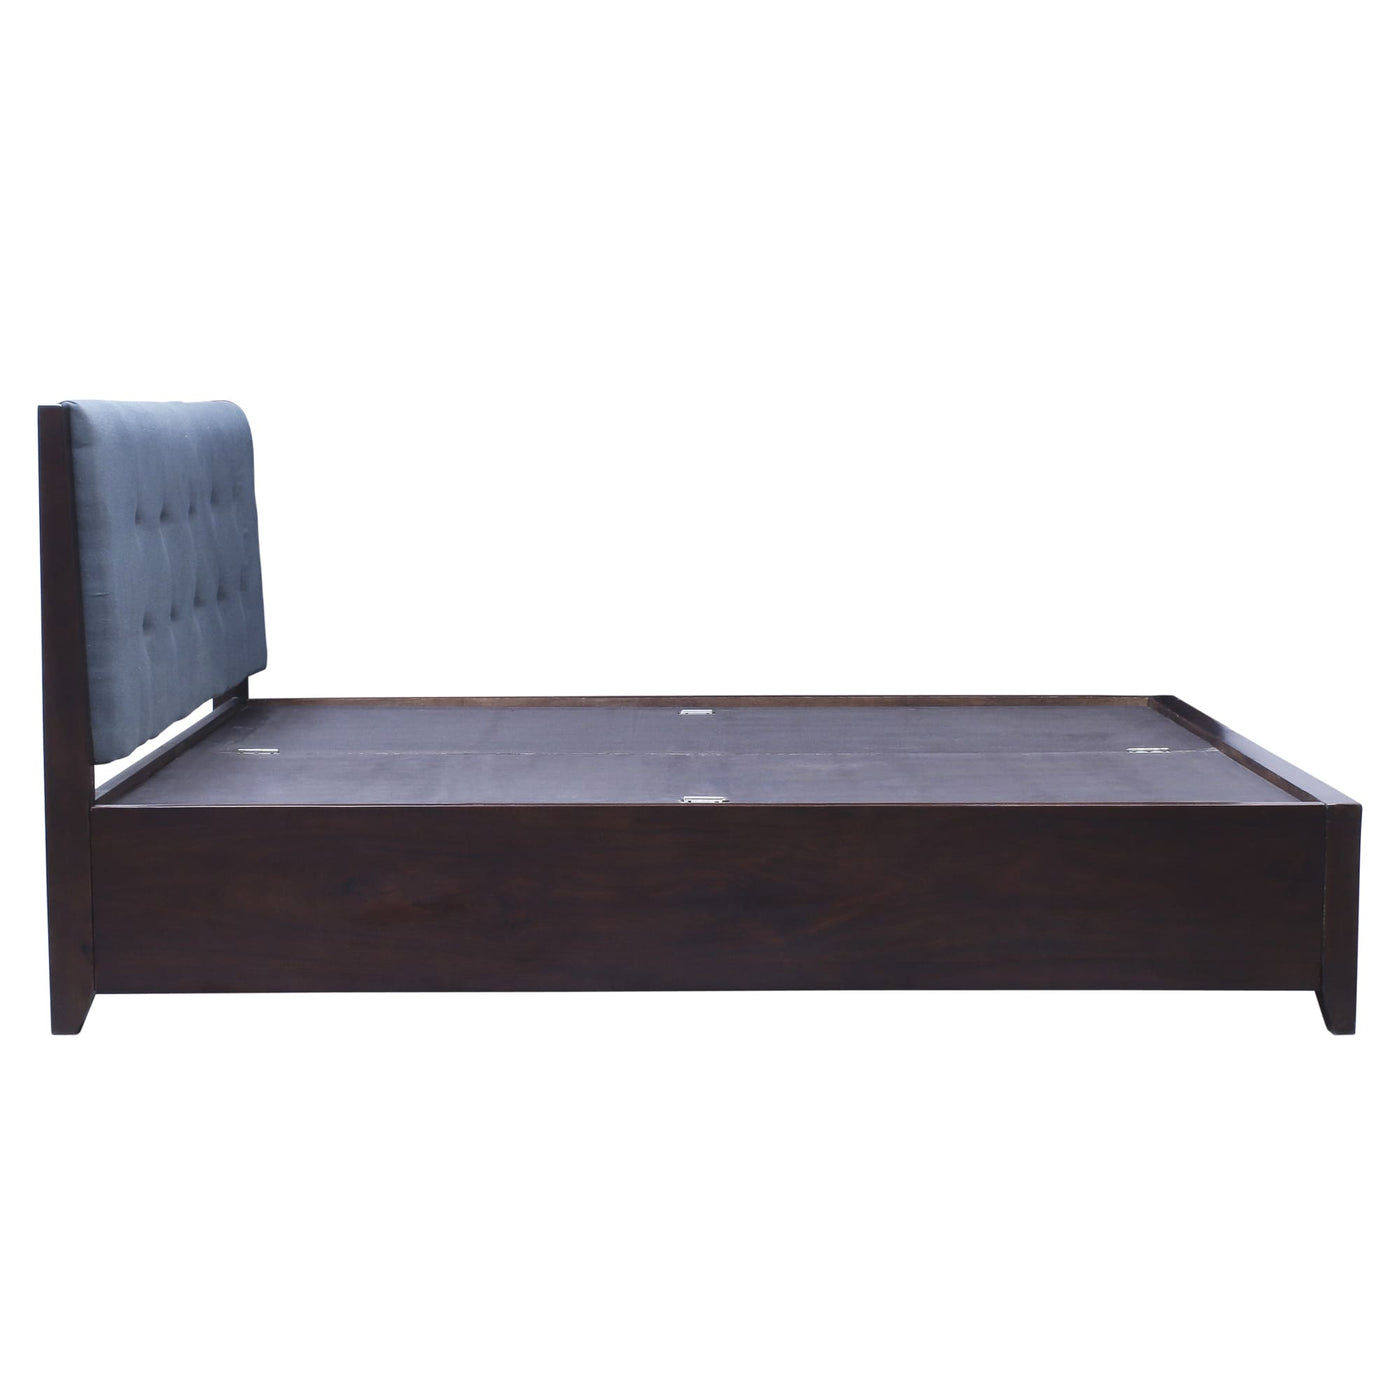 Rapture King Bed With Storage